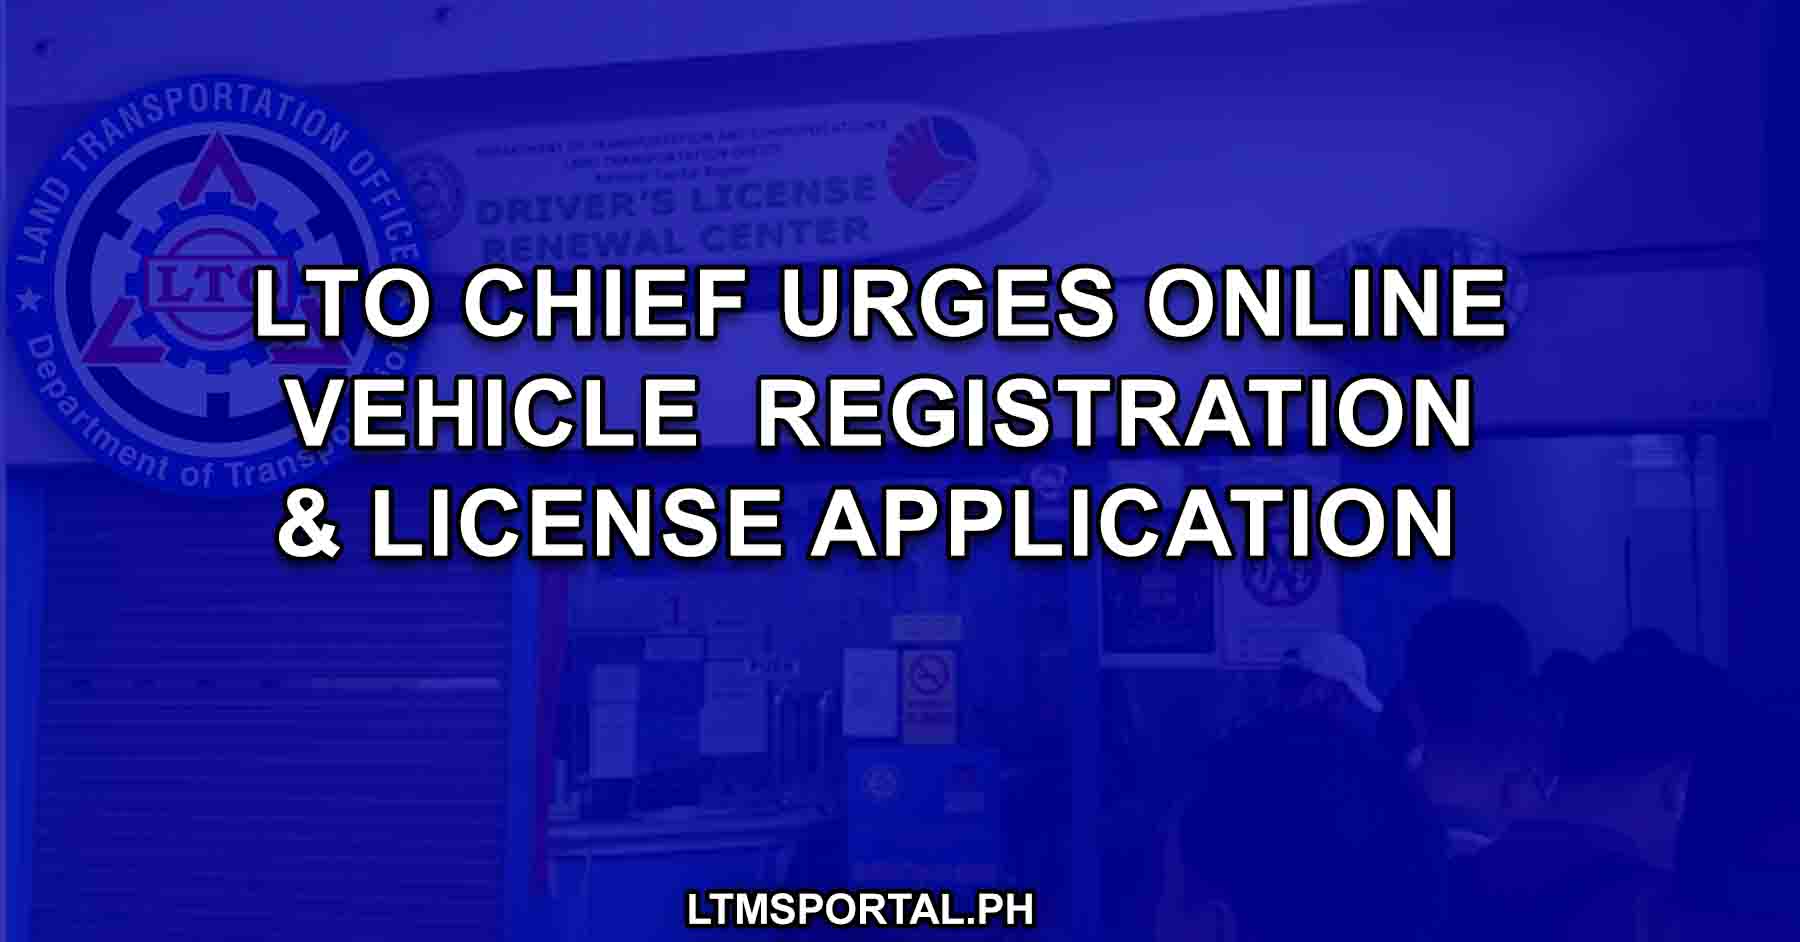 lto chief wants lto transactions done digitally online